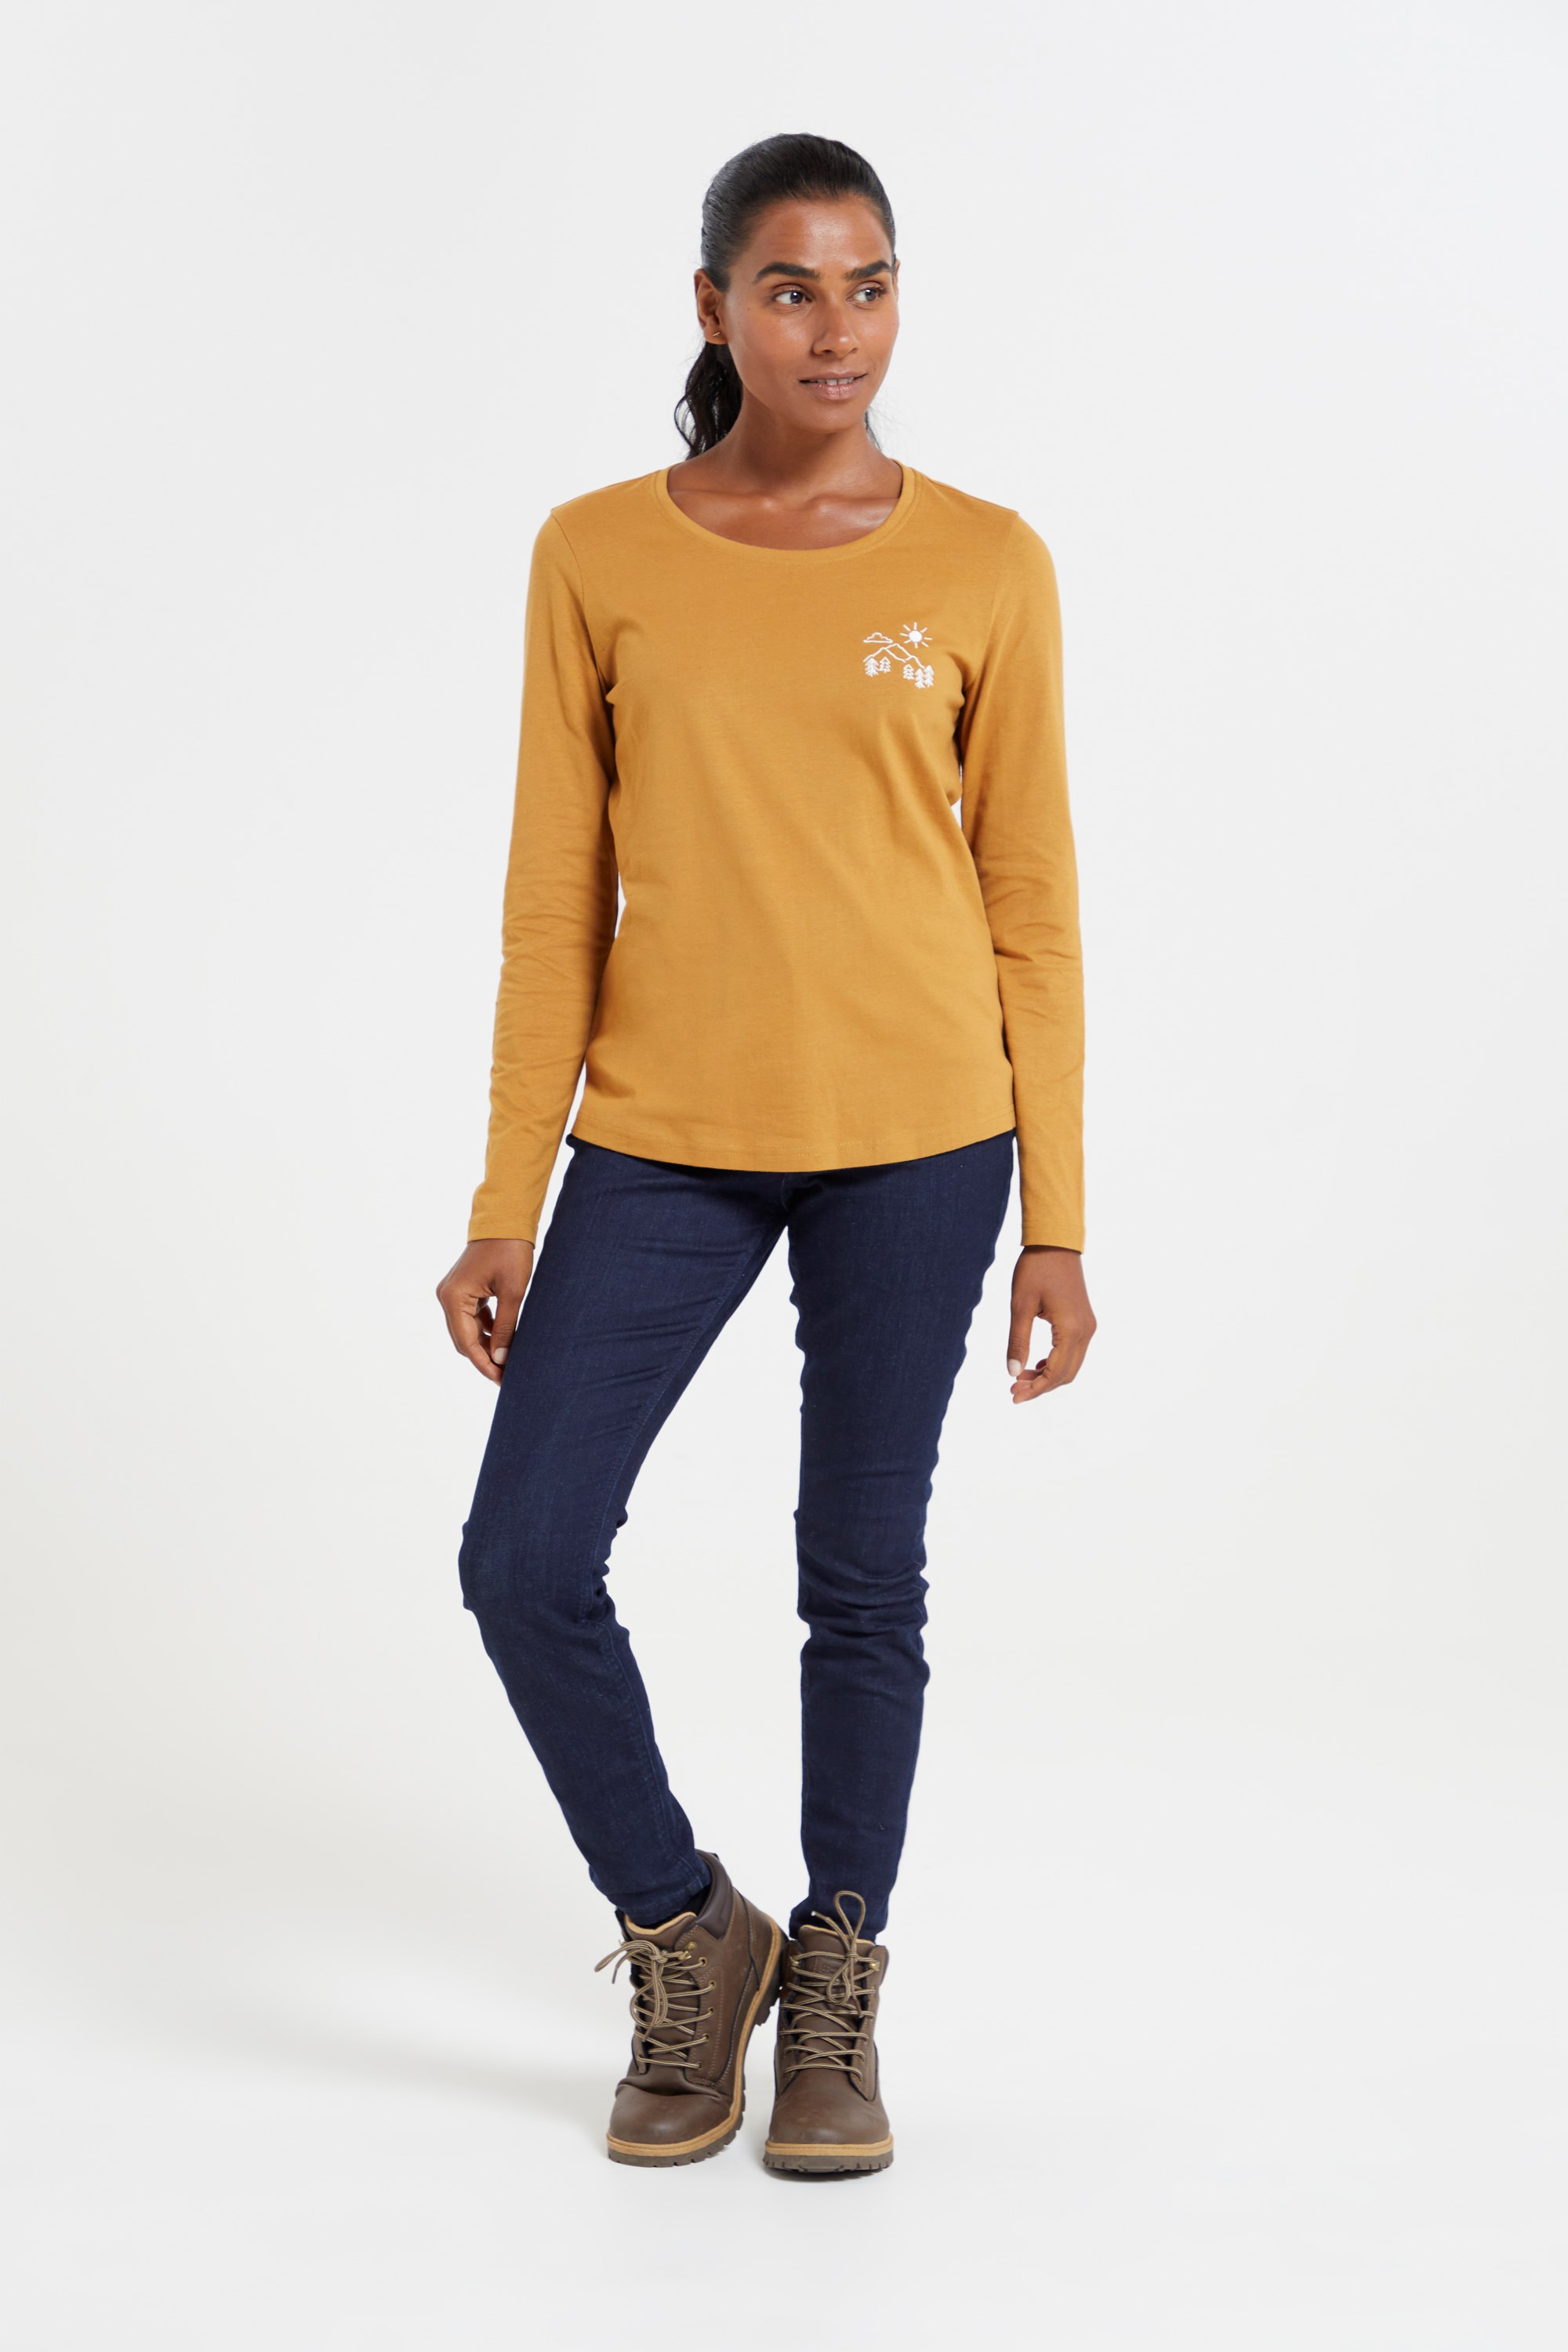 Embroidered Mountain Logo Womens Top